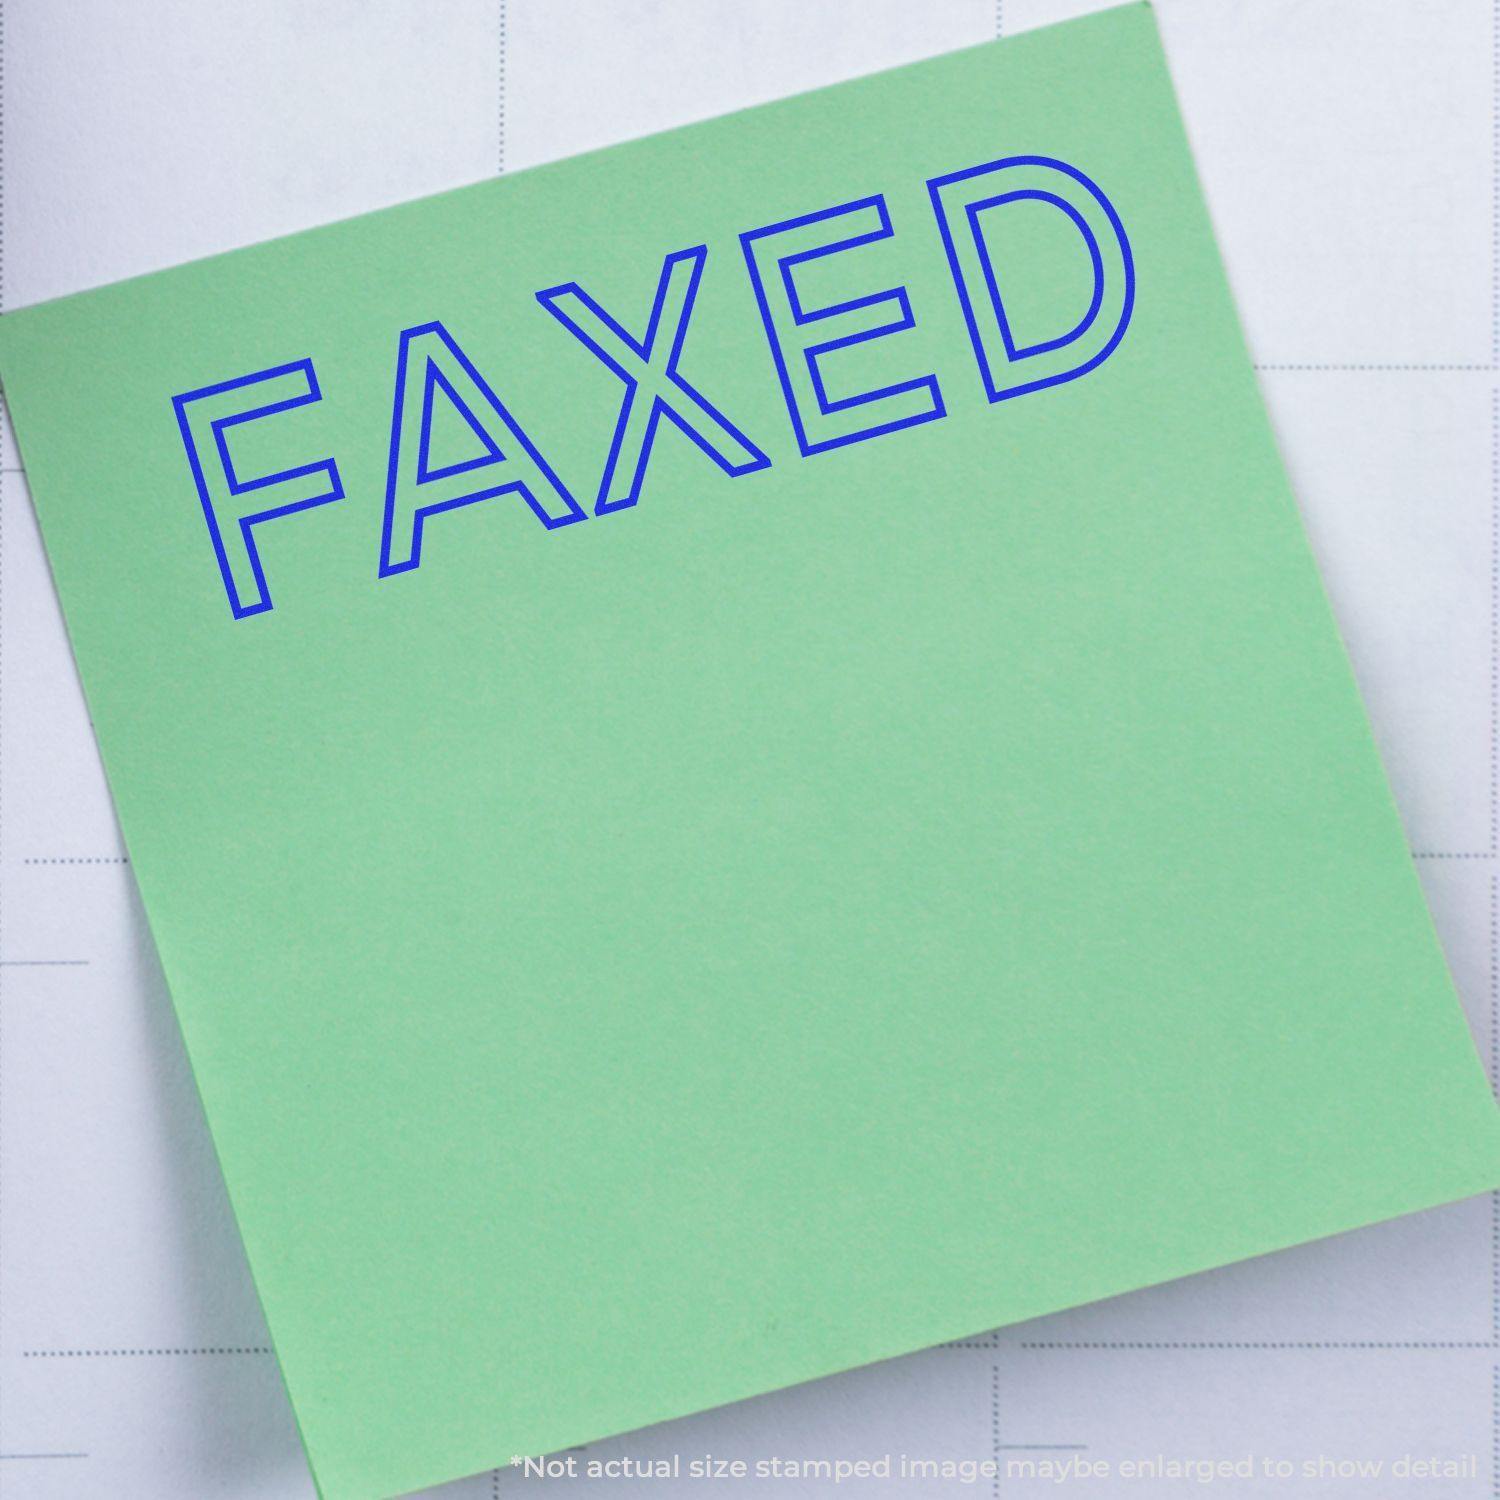 A self-inking stamp with a stamped image showing how the text "FAXED" in a large outline font is displayed by it after stamping.